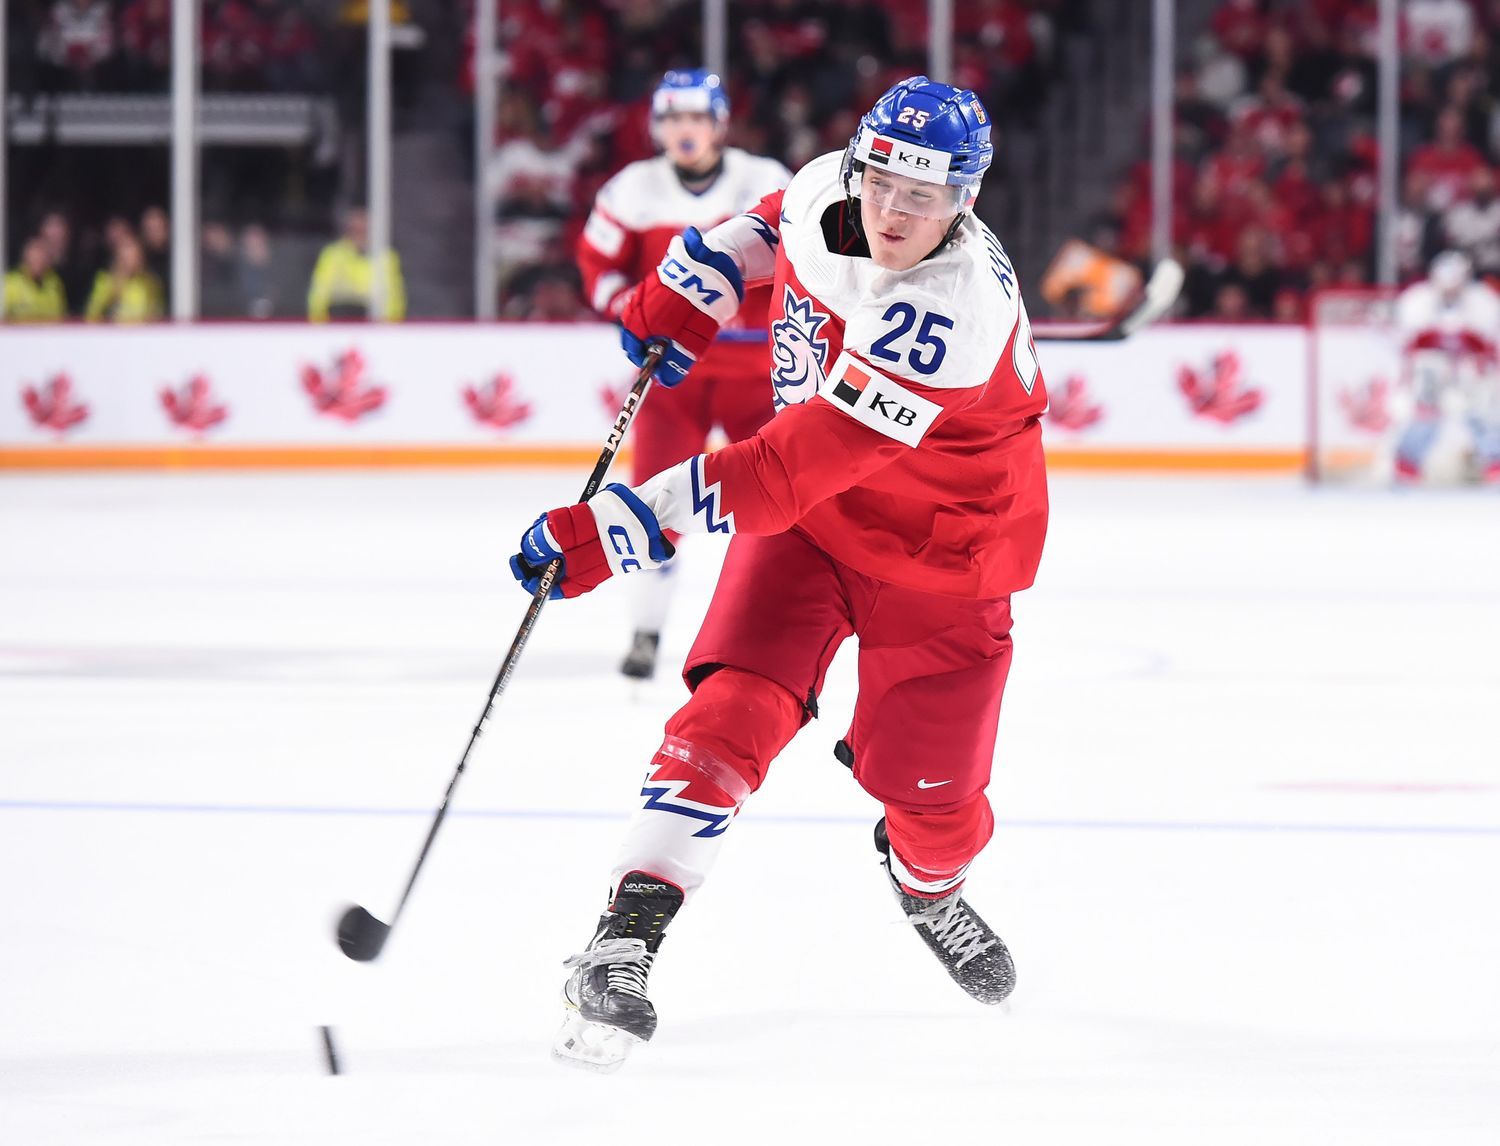 The Czechs are looking forward to having the best player at the World Championships.  They’ll believe it when they arrive with a bagel and hockey sticks